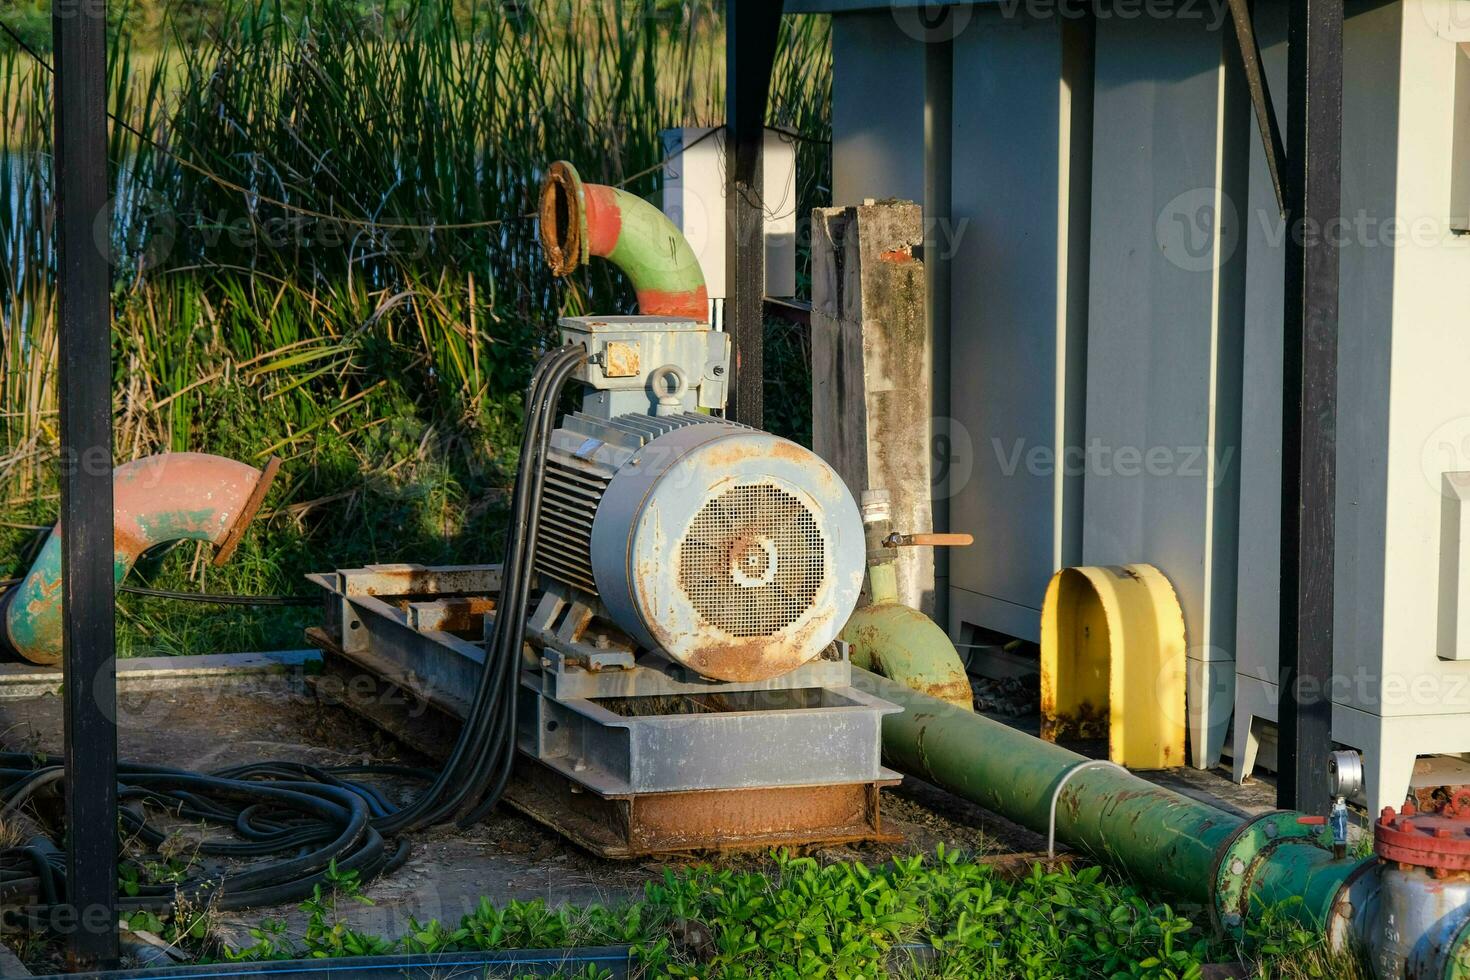 Waters pump by the pond. photo